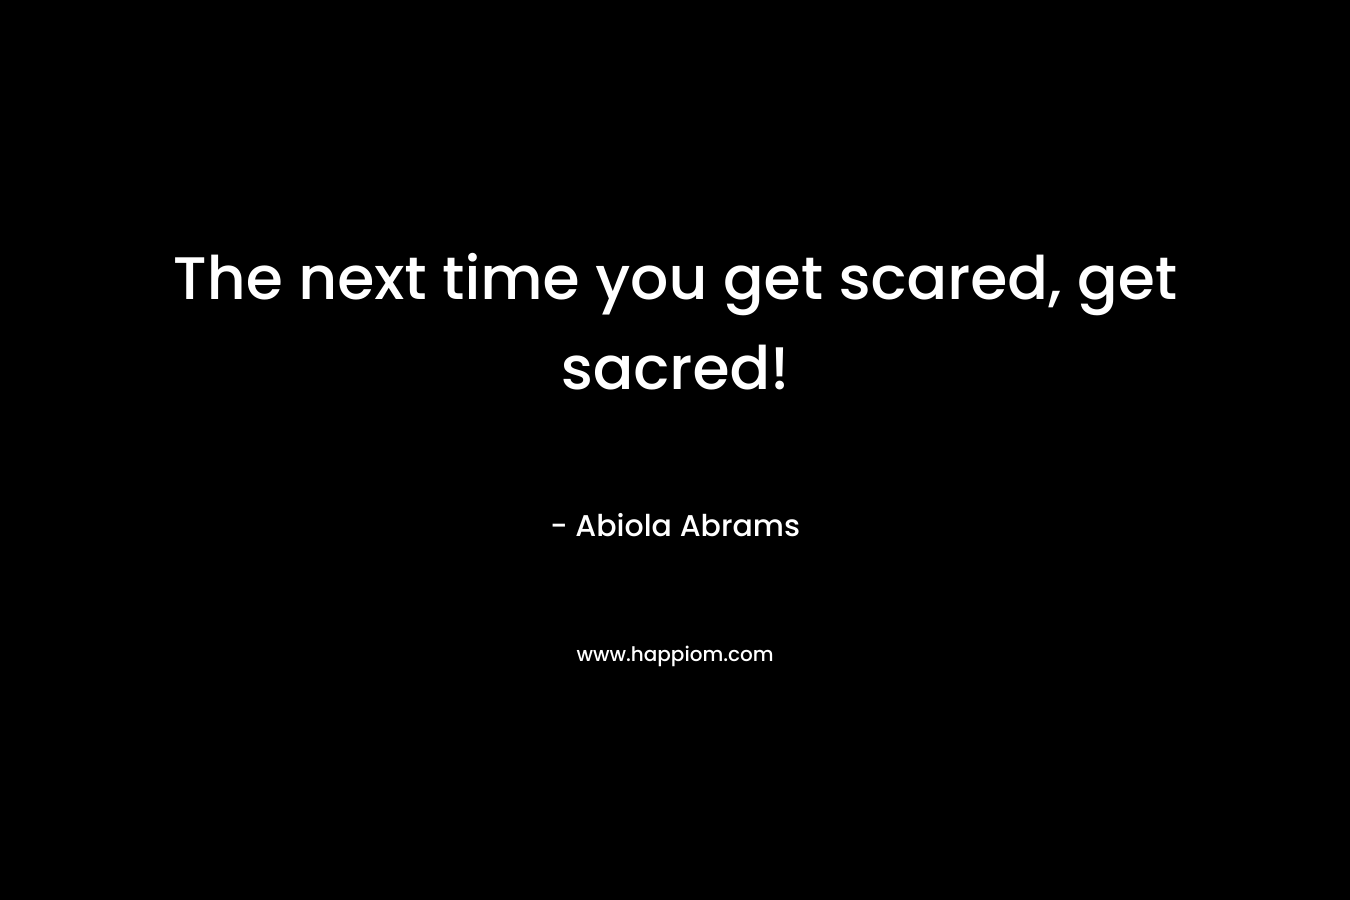 The next time you get scared, get sacred! – Abiola Abrams